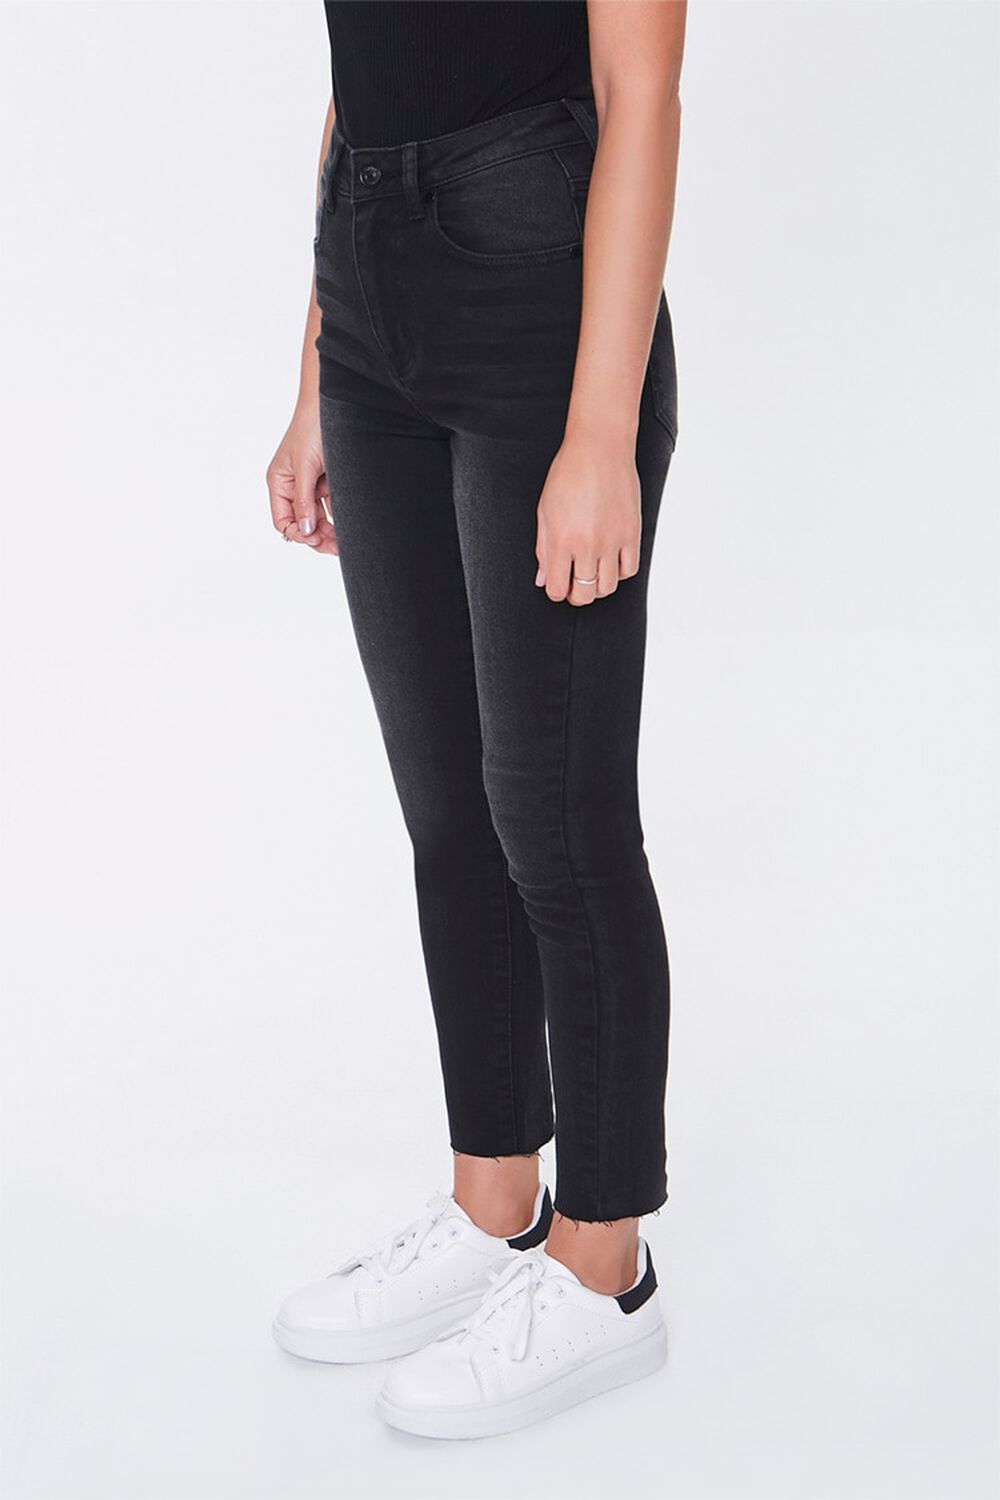 WASHED BLACK Petite High-Rise Mom Jeans, image 2